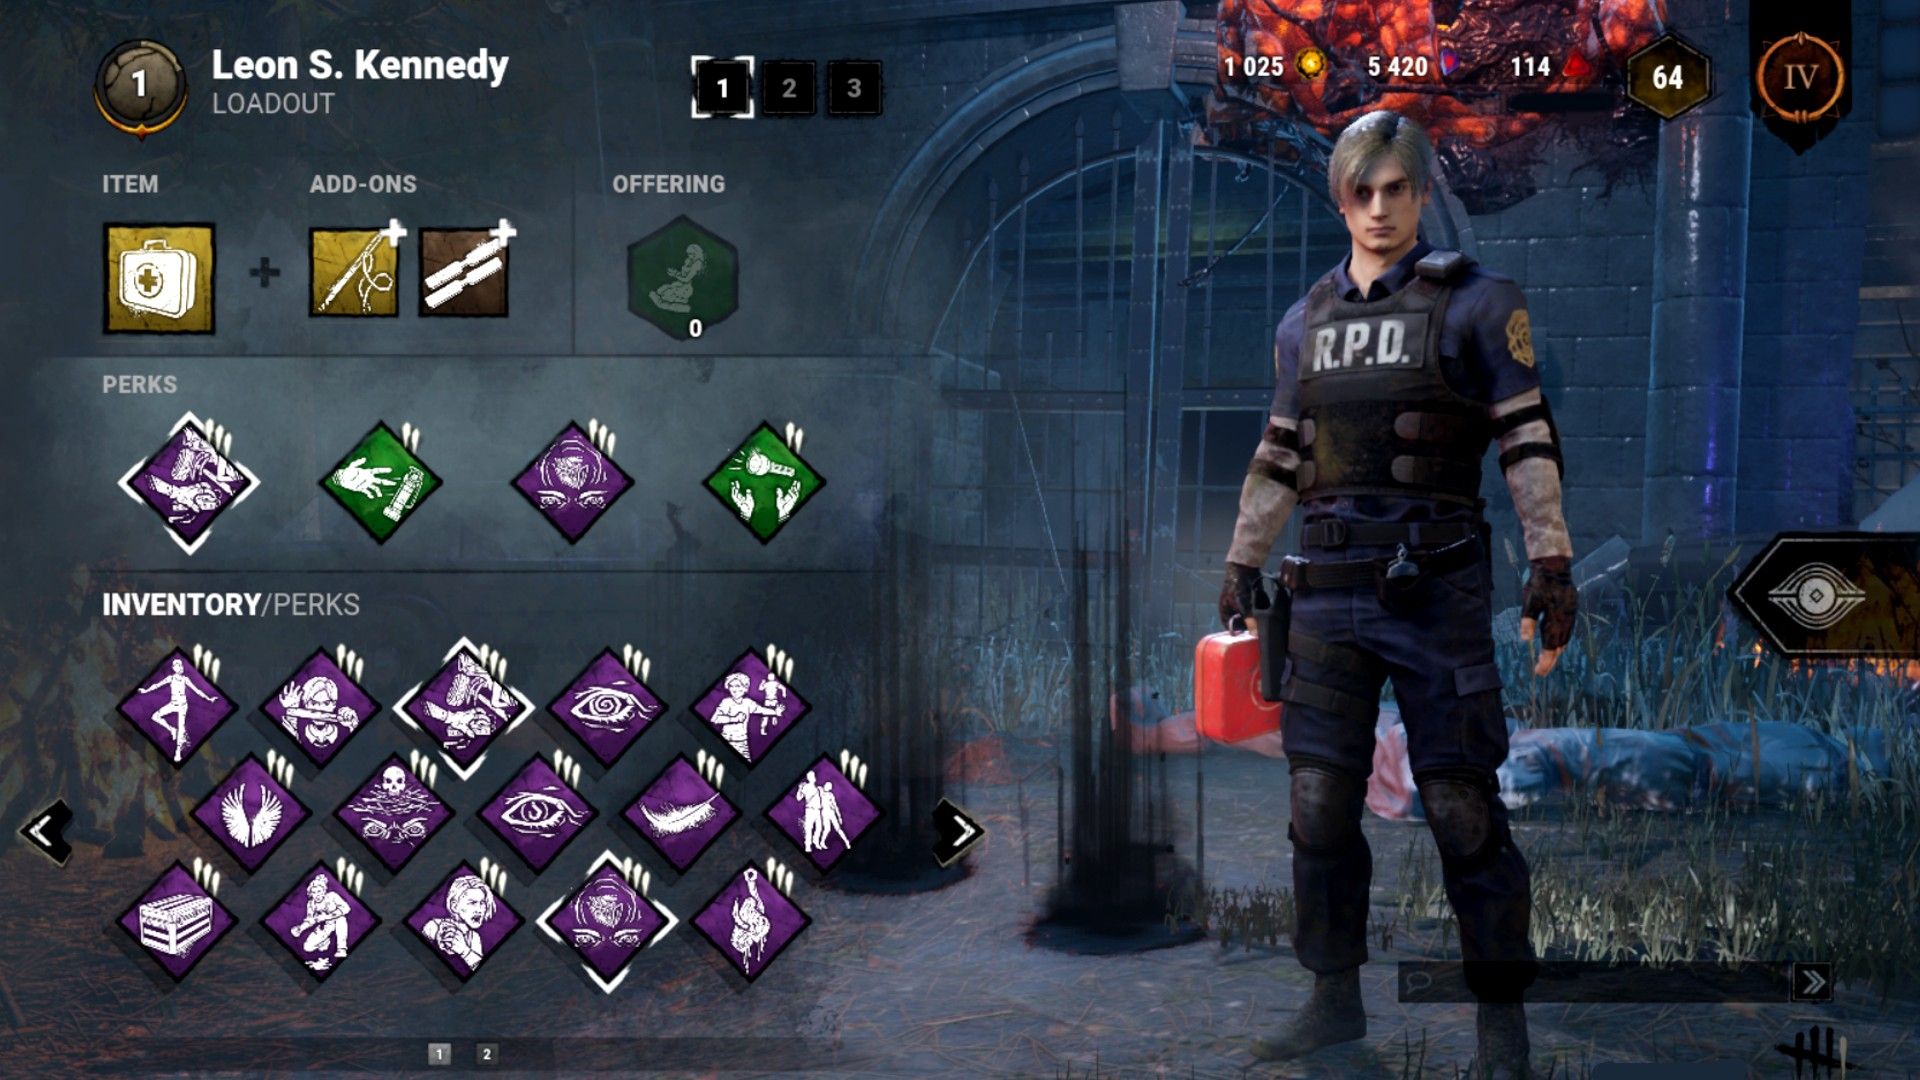 Leon's aggressive build to fight back against the Killer in Dead By Daylight